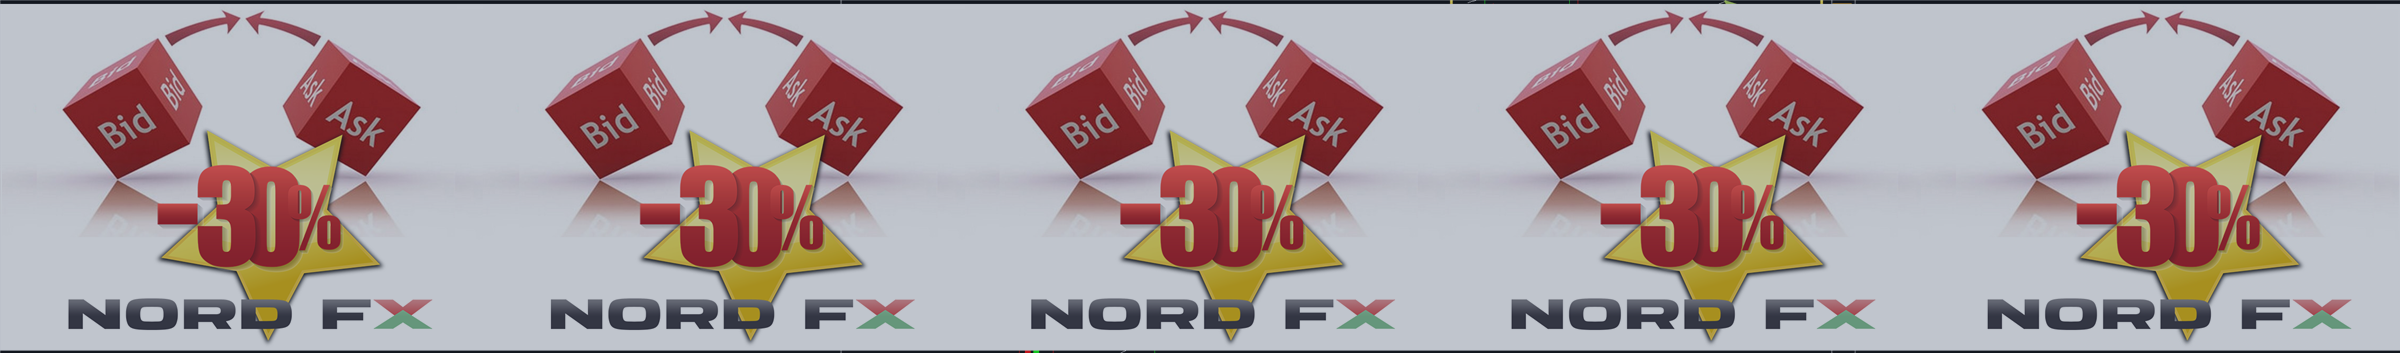 NordFX Hits Record for Better Trading Terms